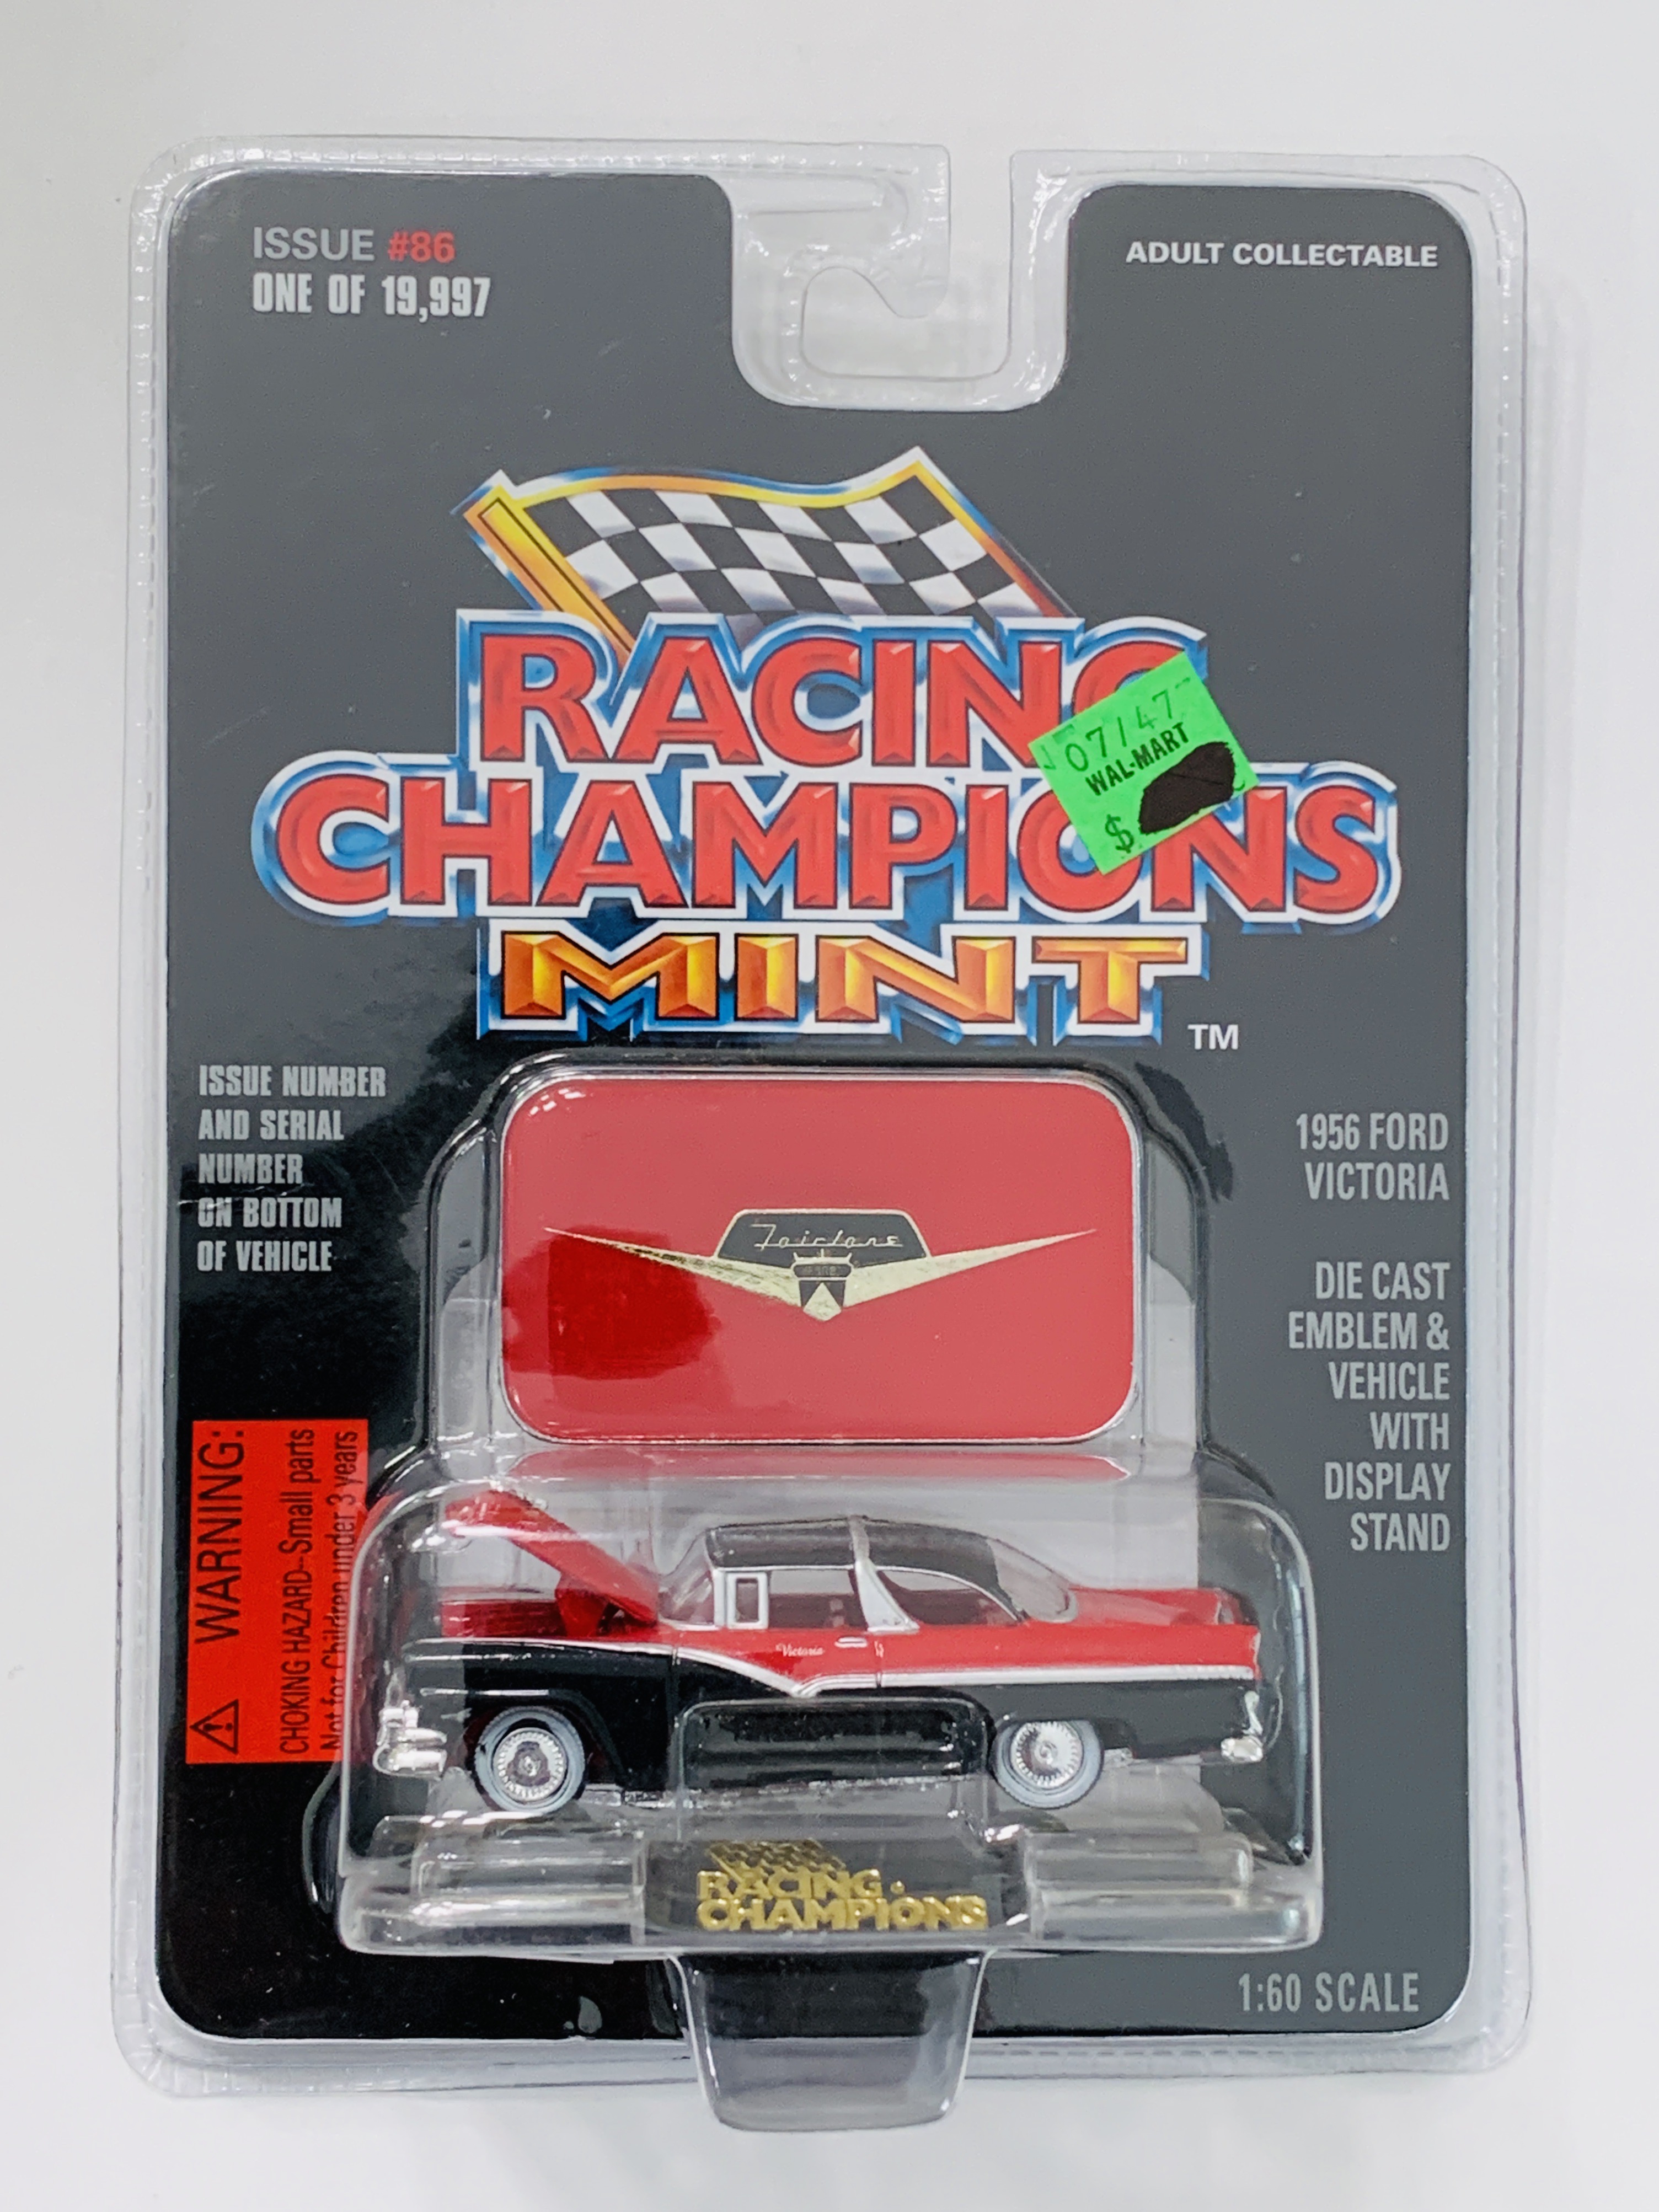 Racing Champions Mint Edition 1956 Ford Victoria